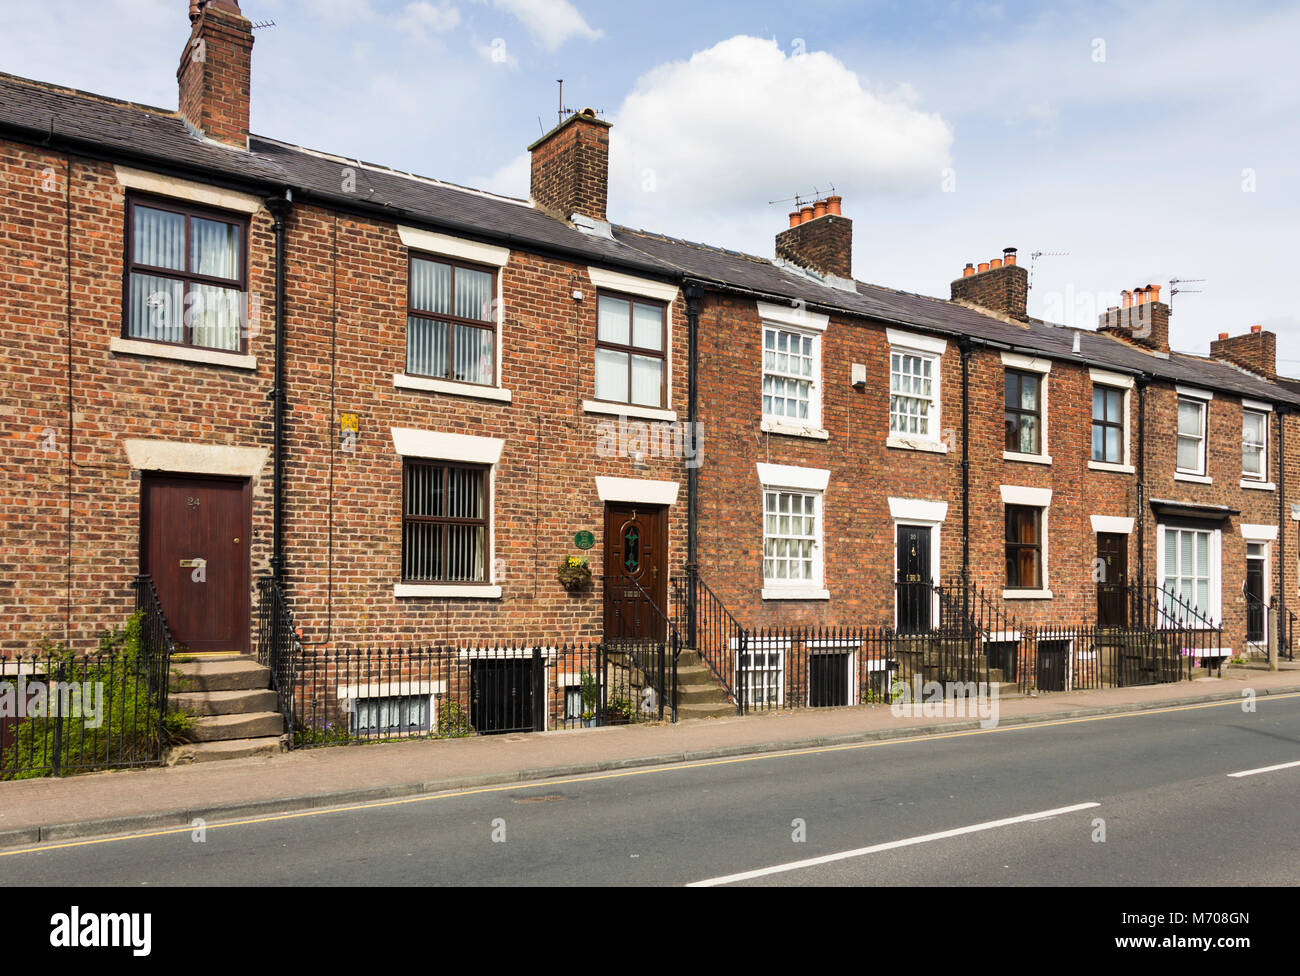 Step Houses (Friendly Society Houses) in Fox Lane, Leyland, Lancashire. These houses were built around 1802 with a basement intended for workshop use. Stock Photo